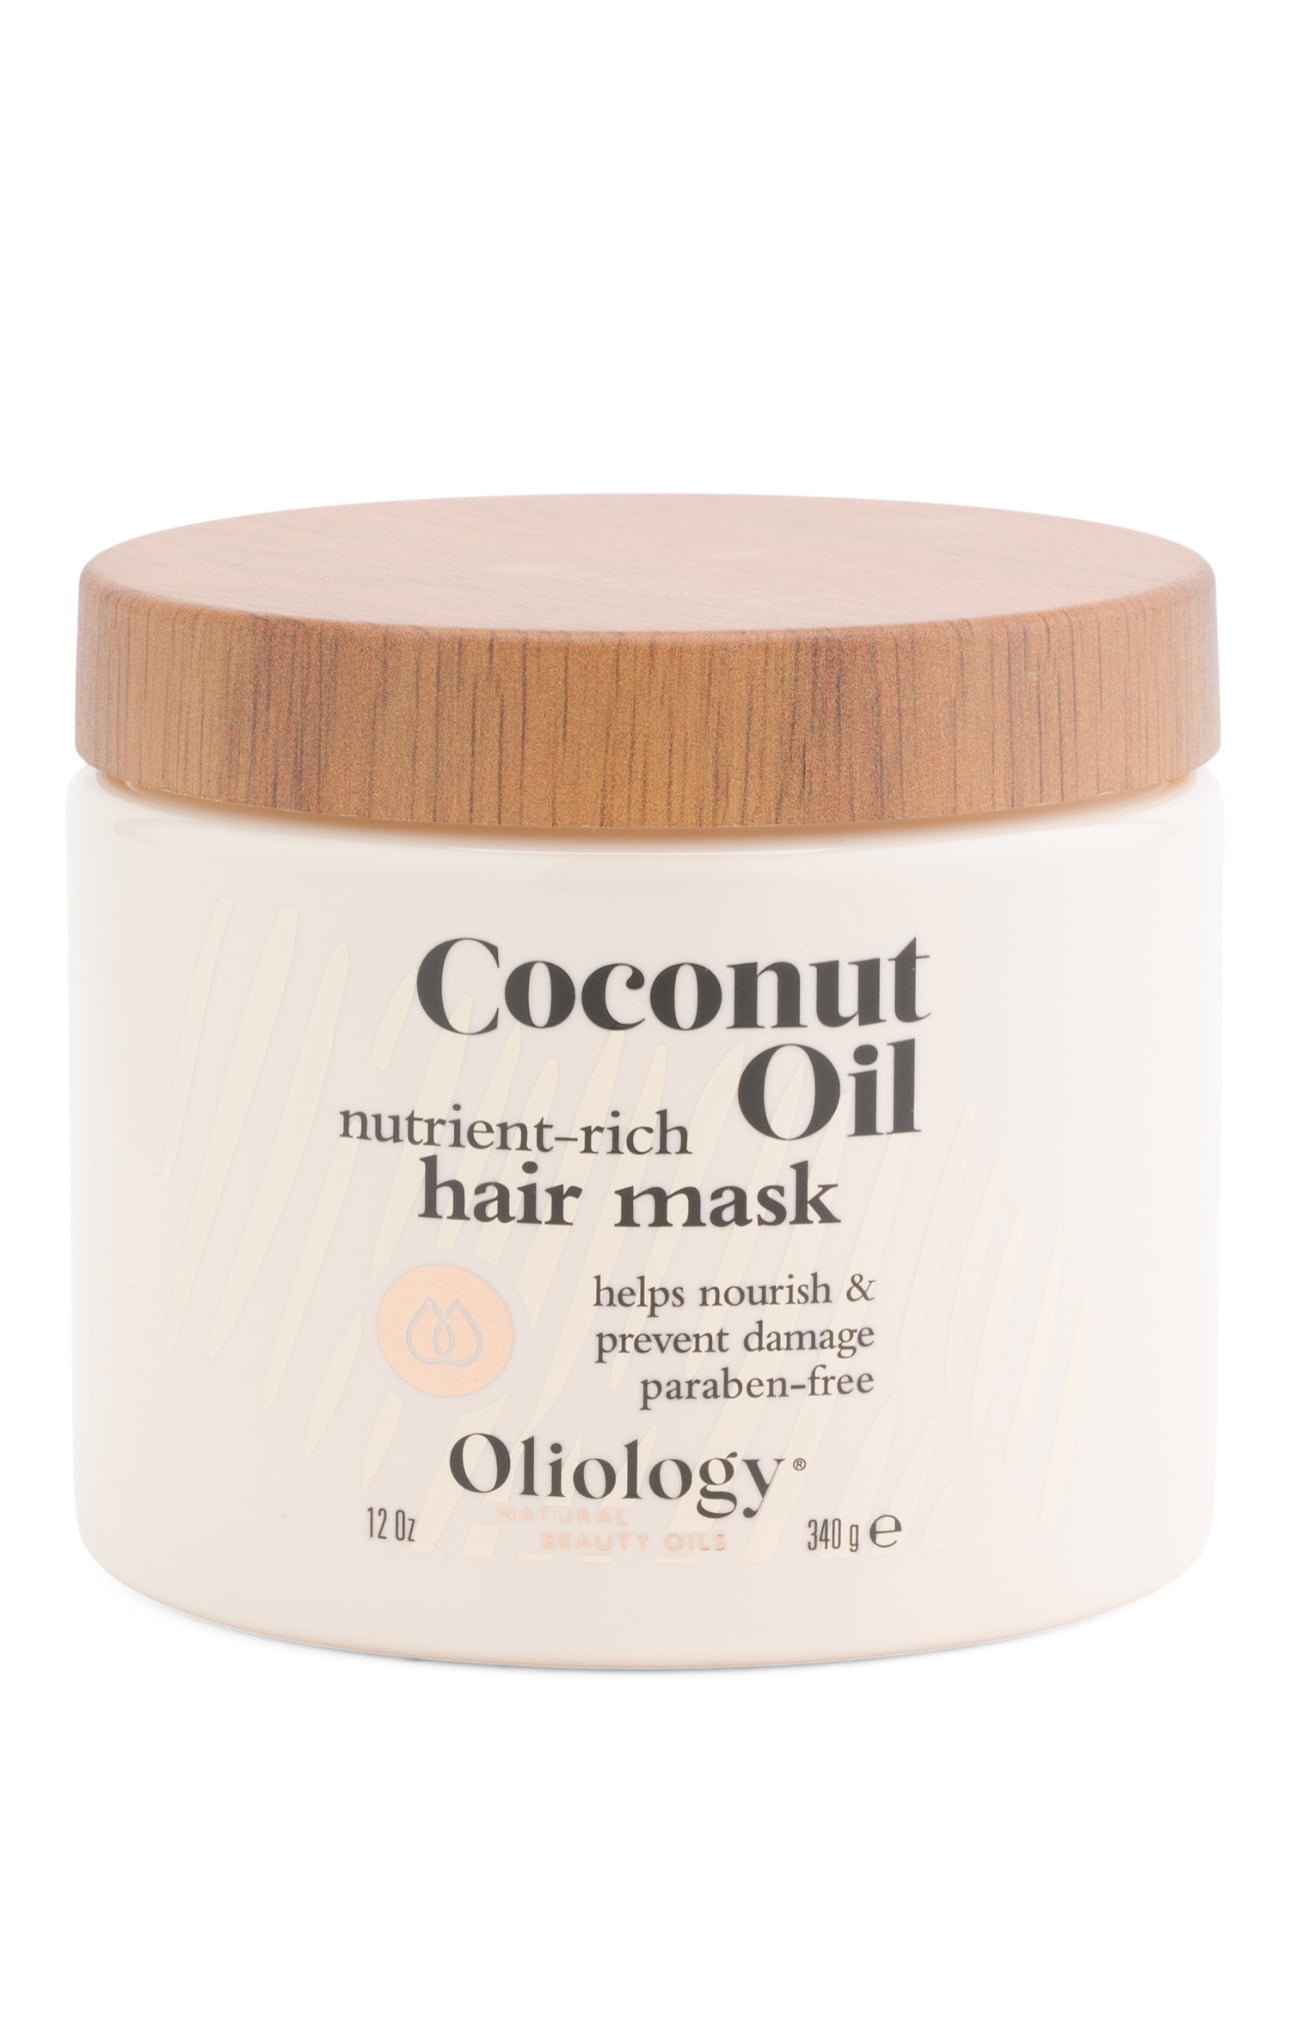 Oliology Coconut Oil Hair Mask - Helps Repair & Prevent Damage 12oz ...